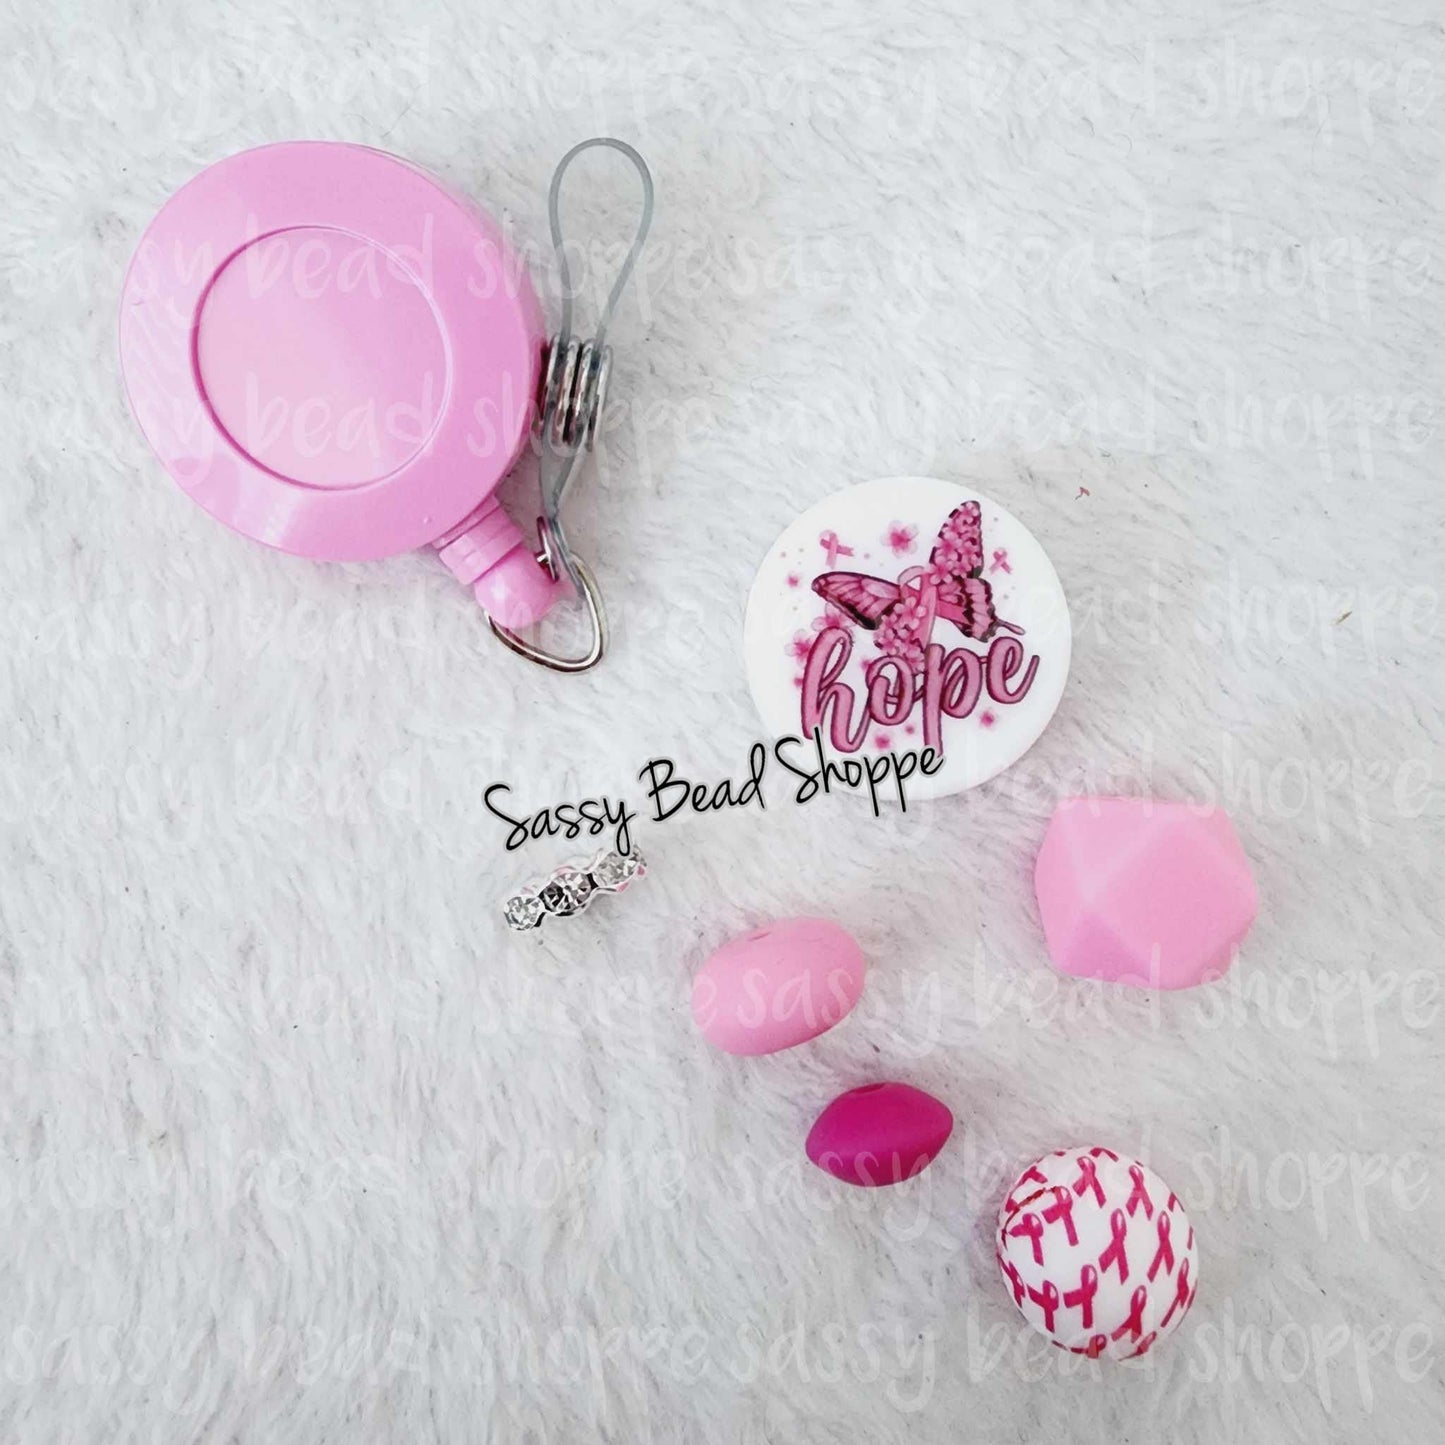 Sassy Bead Shoppe Hope Ribbon Badge Reel What you will receive in your kit